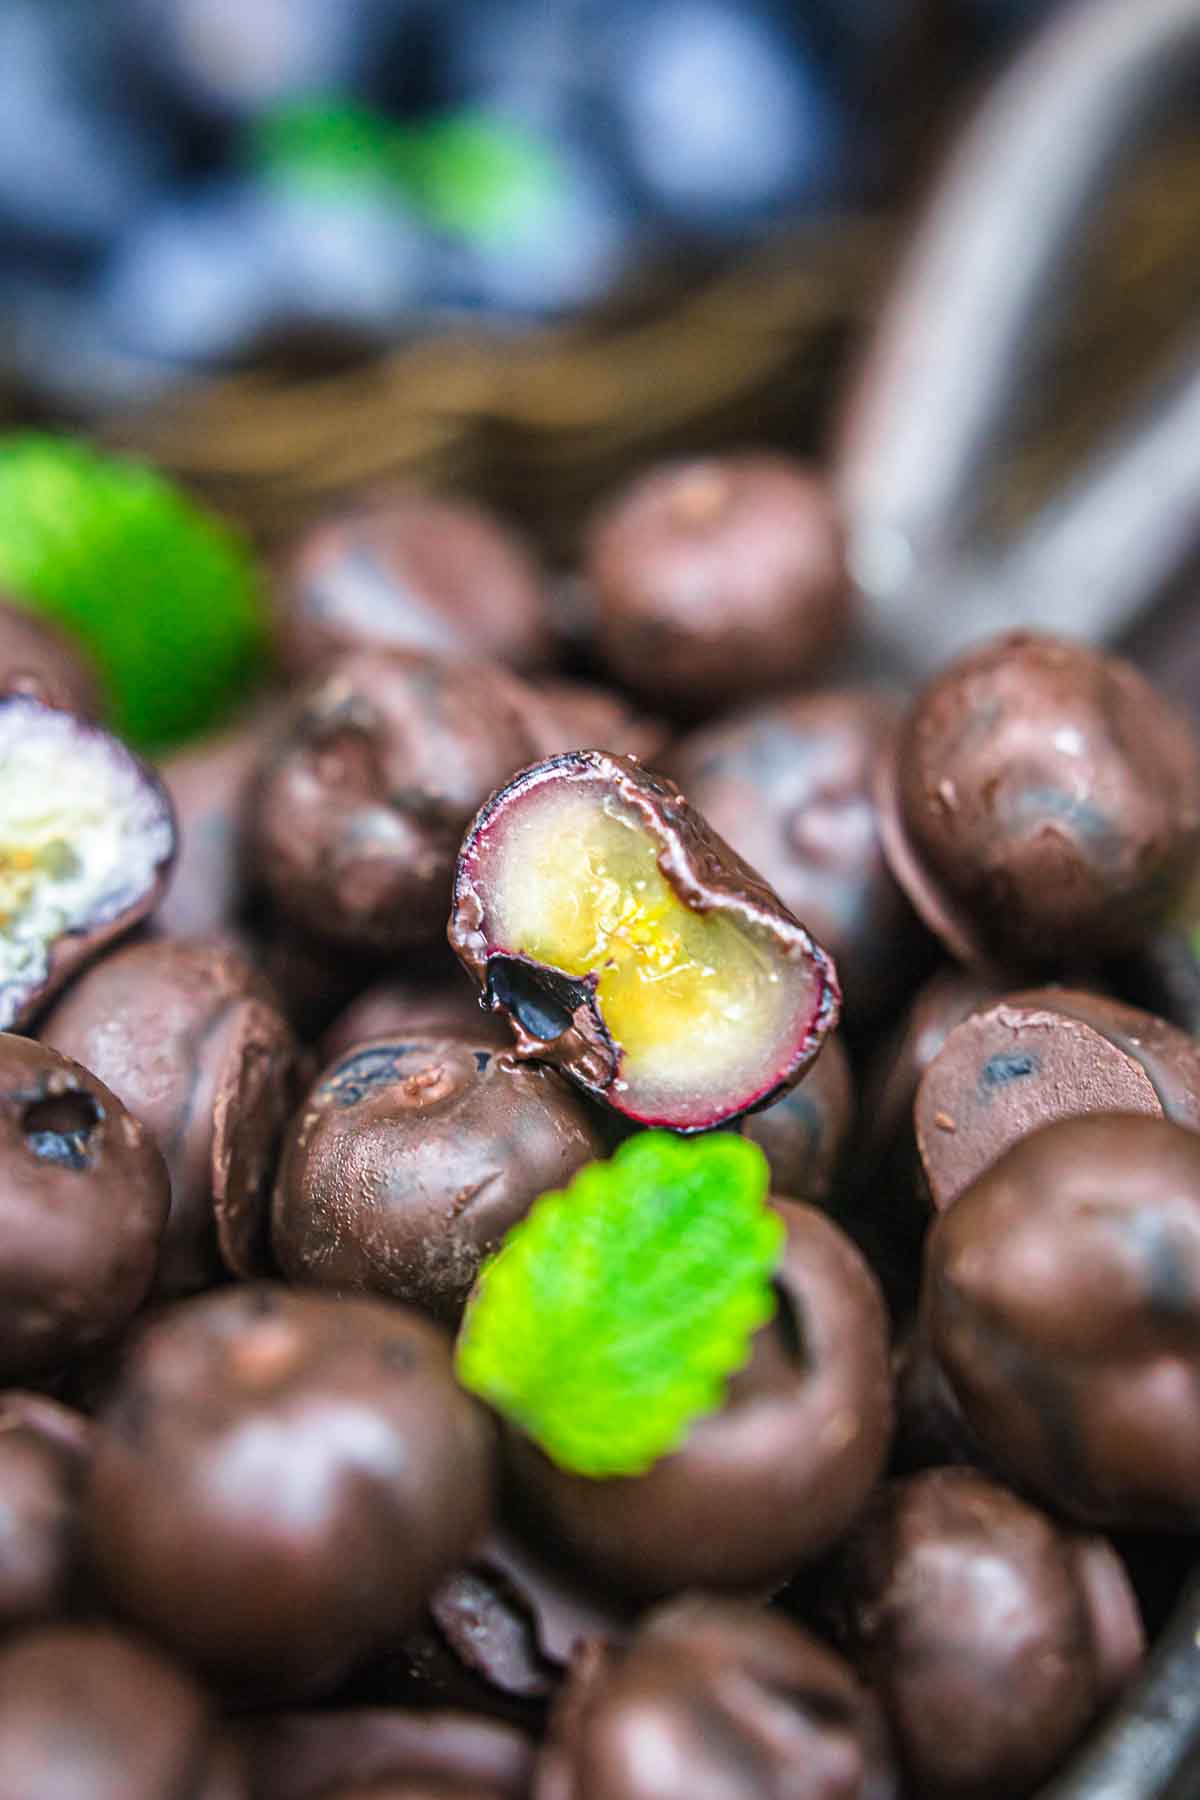 A bowl of chocolate covered blueberries with mint leaves.